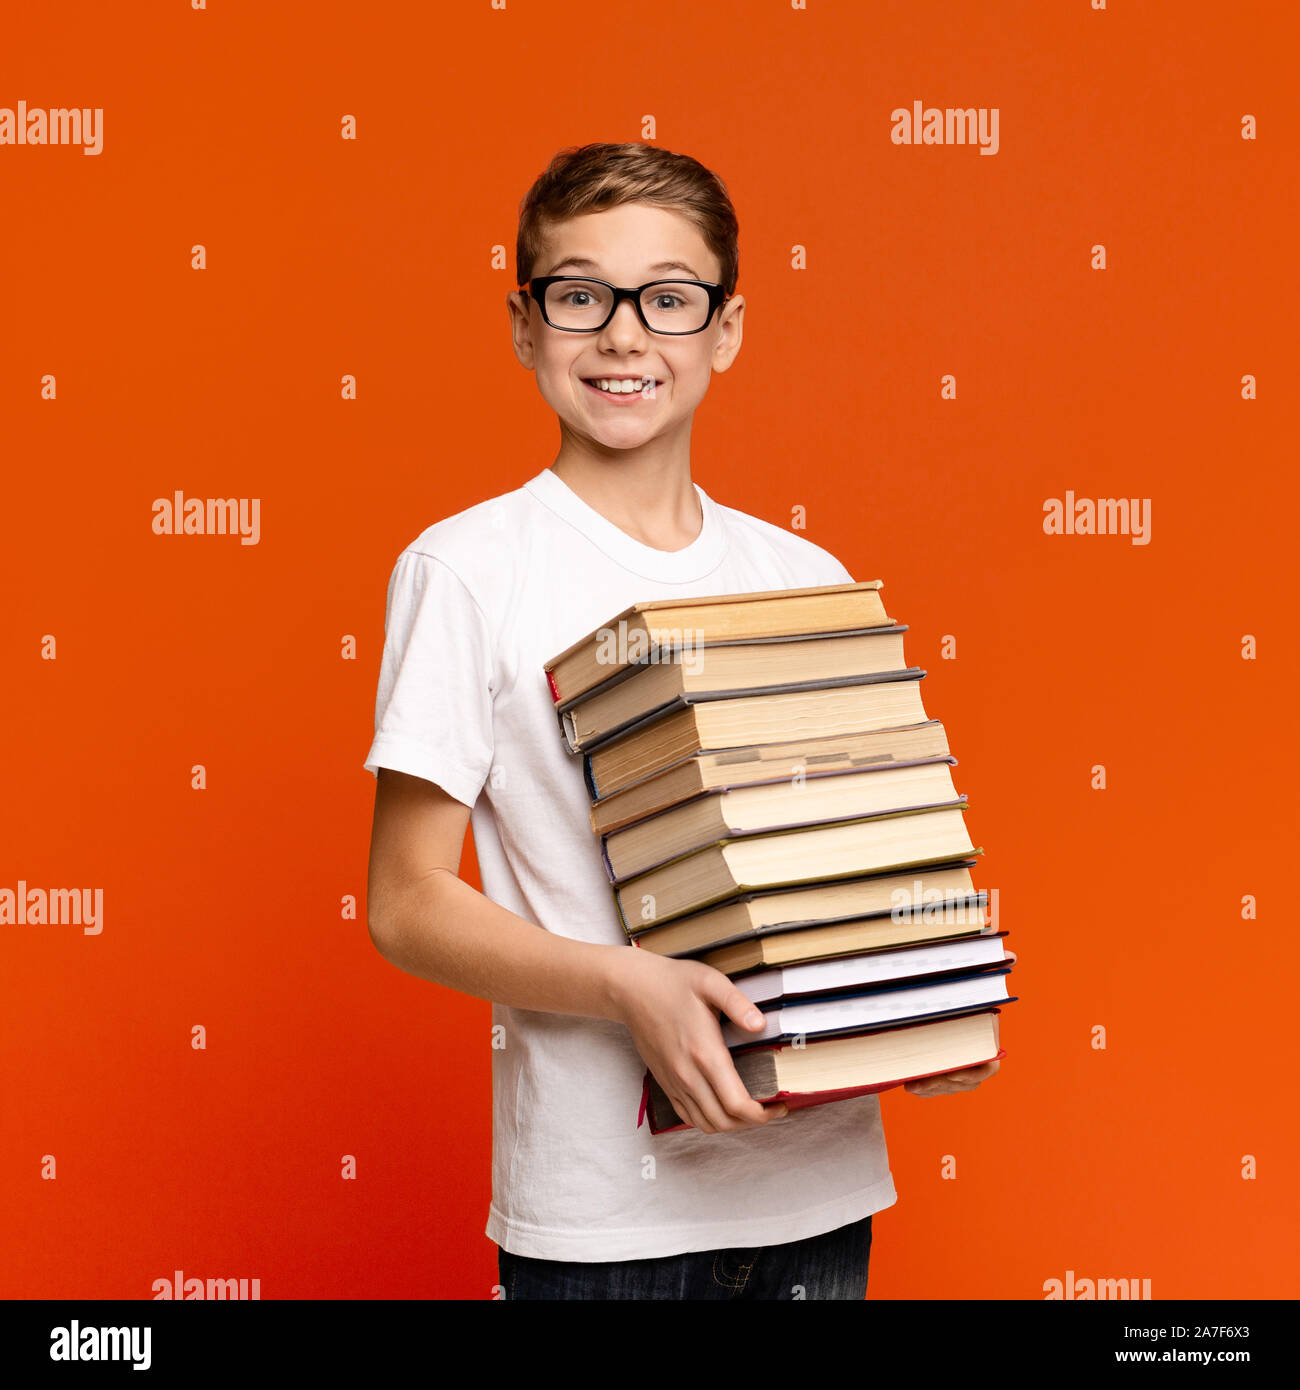 Smart teenage boy in glasses holding stack of books Stock Photo